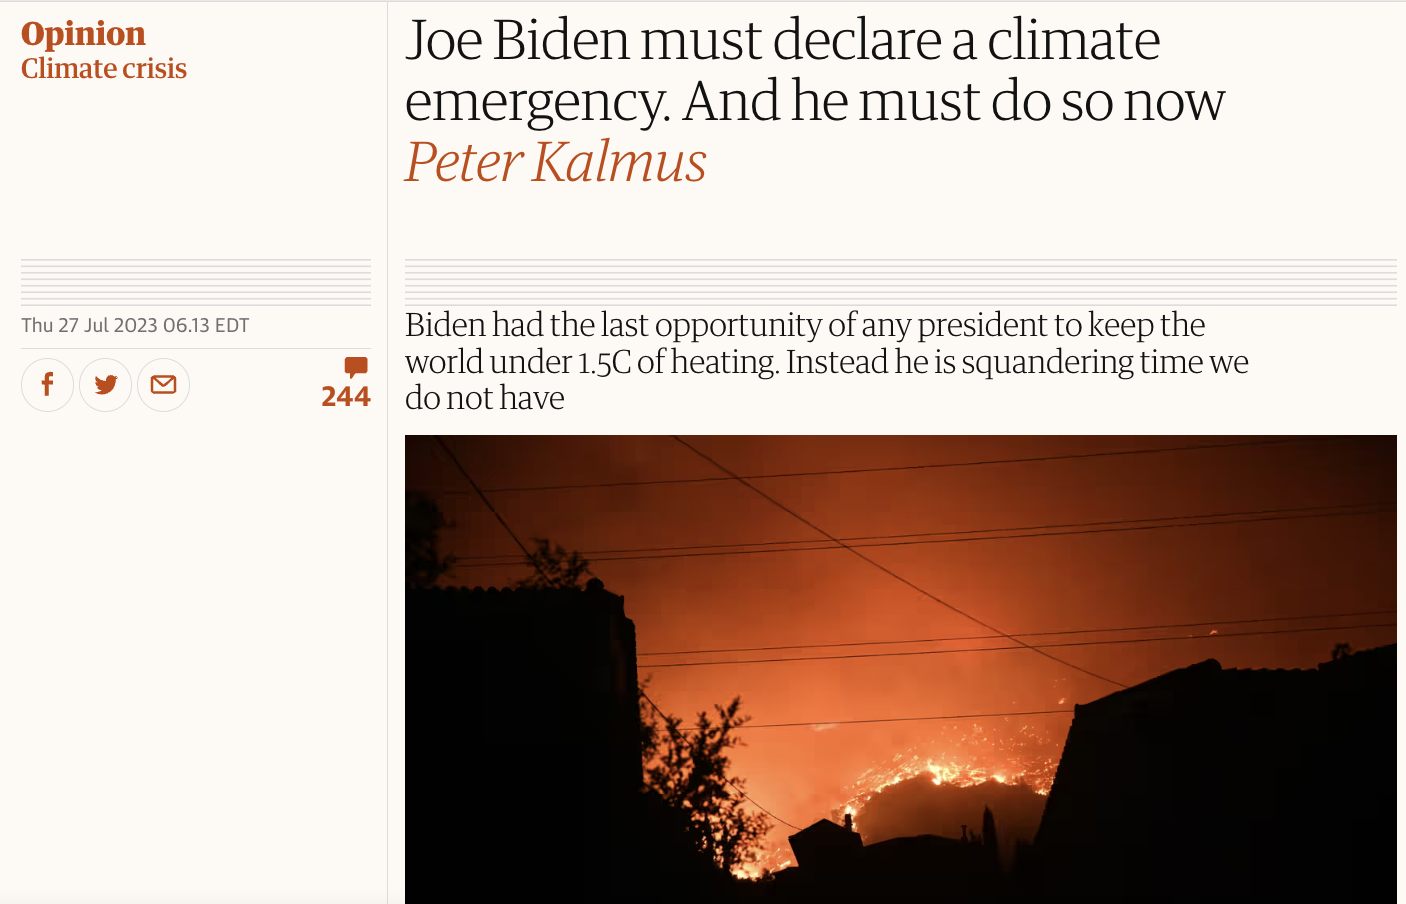 Dumper Diving NASA Climate Scientist Peter Kalmus: ‘Biden must declare a climate emergency’ – Admit he has ‘bottomless grief’ because ‘we are losing Earth’ & seeks to ‘end’ fossil fuels